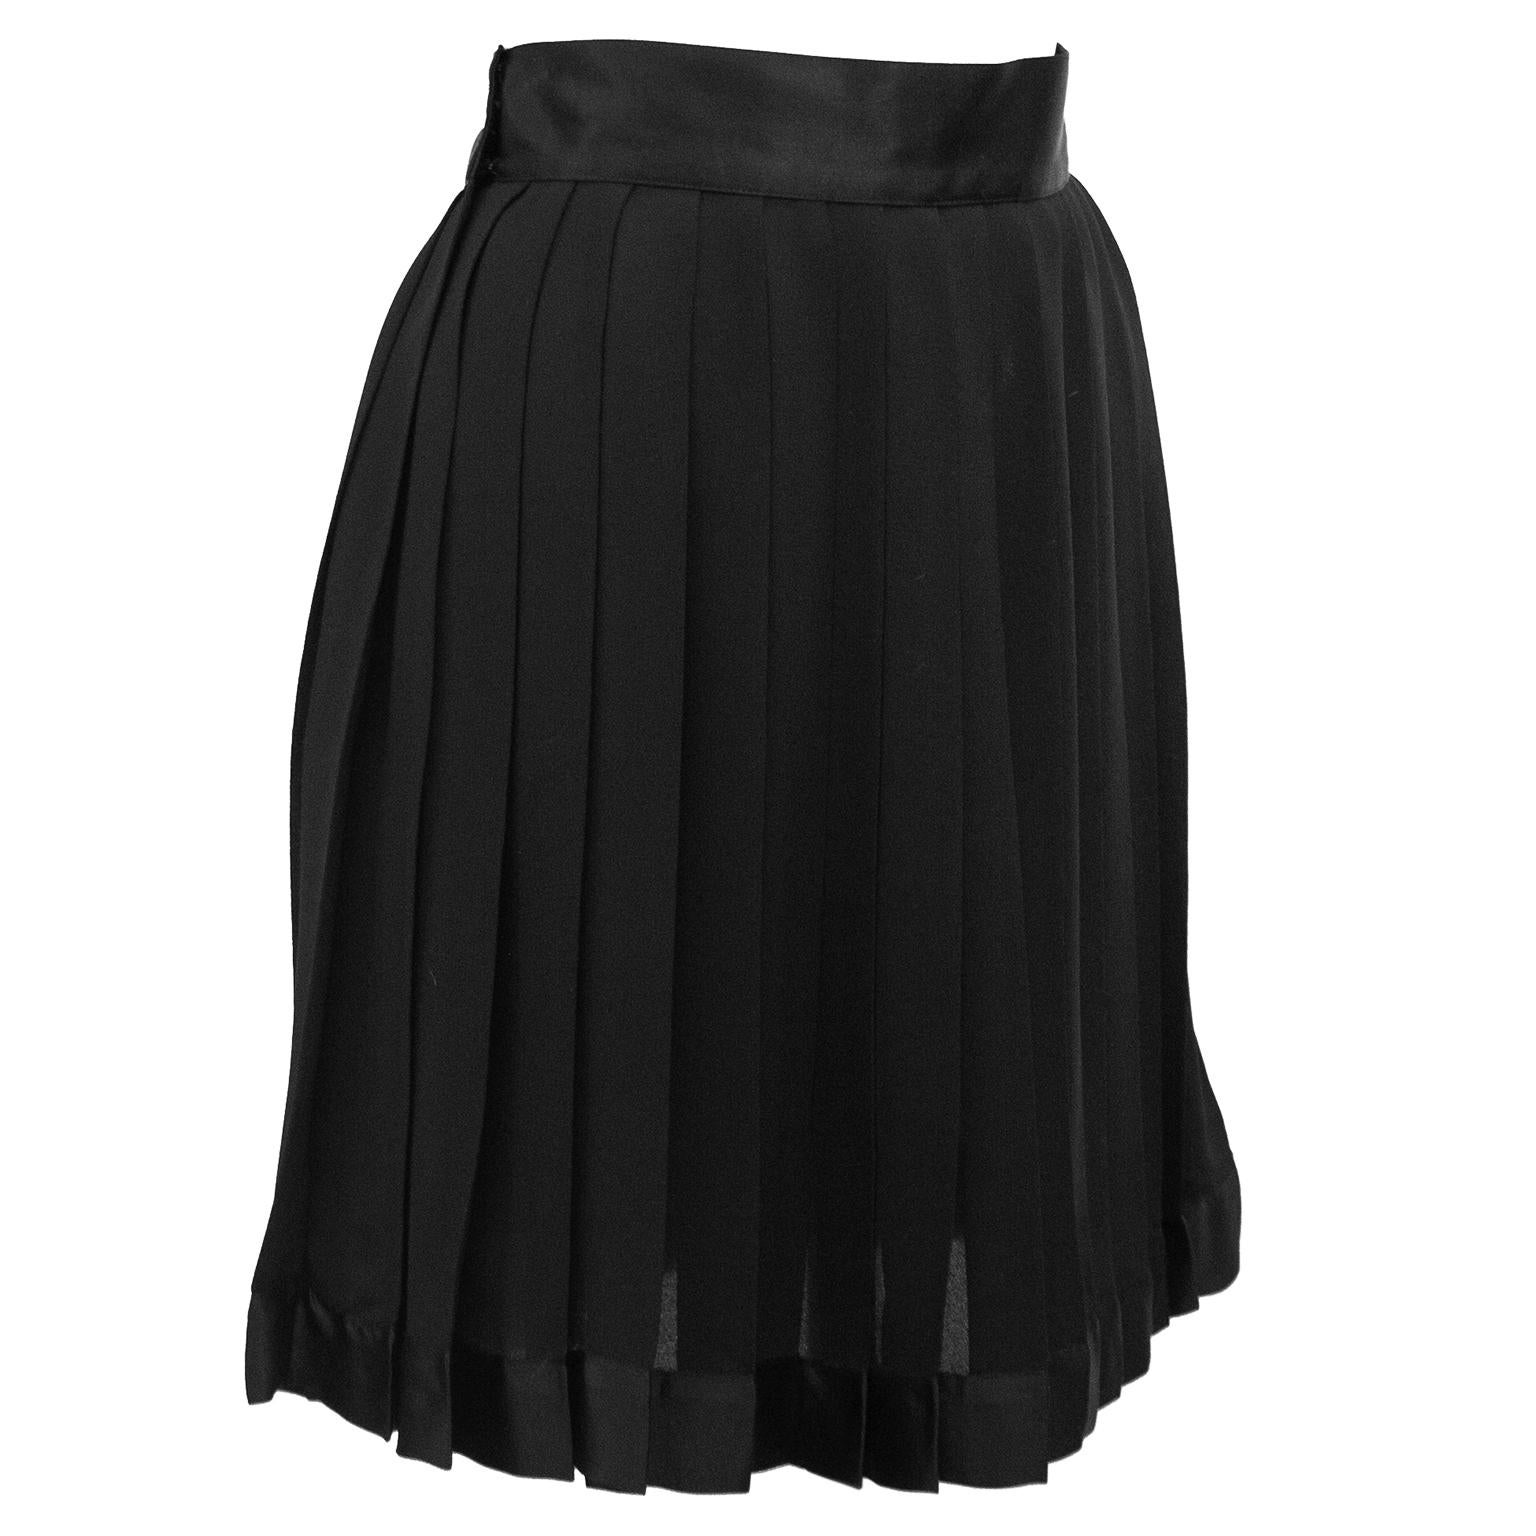 Your classic LBS (little back skirt) from the early 1990's by Gianni Versace. High waisted with a black silk satin waist band and black pleated silk chiffon skirt. Covered hook and eye closure. Black slip lining. Excellent vintage condition,